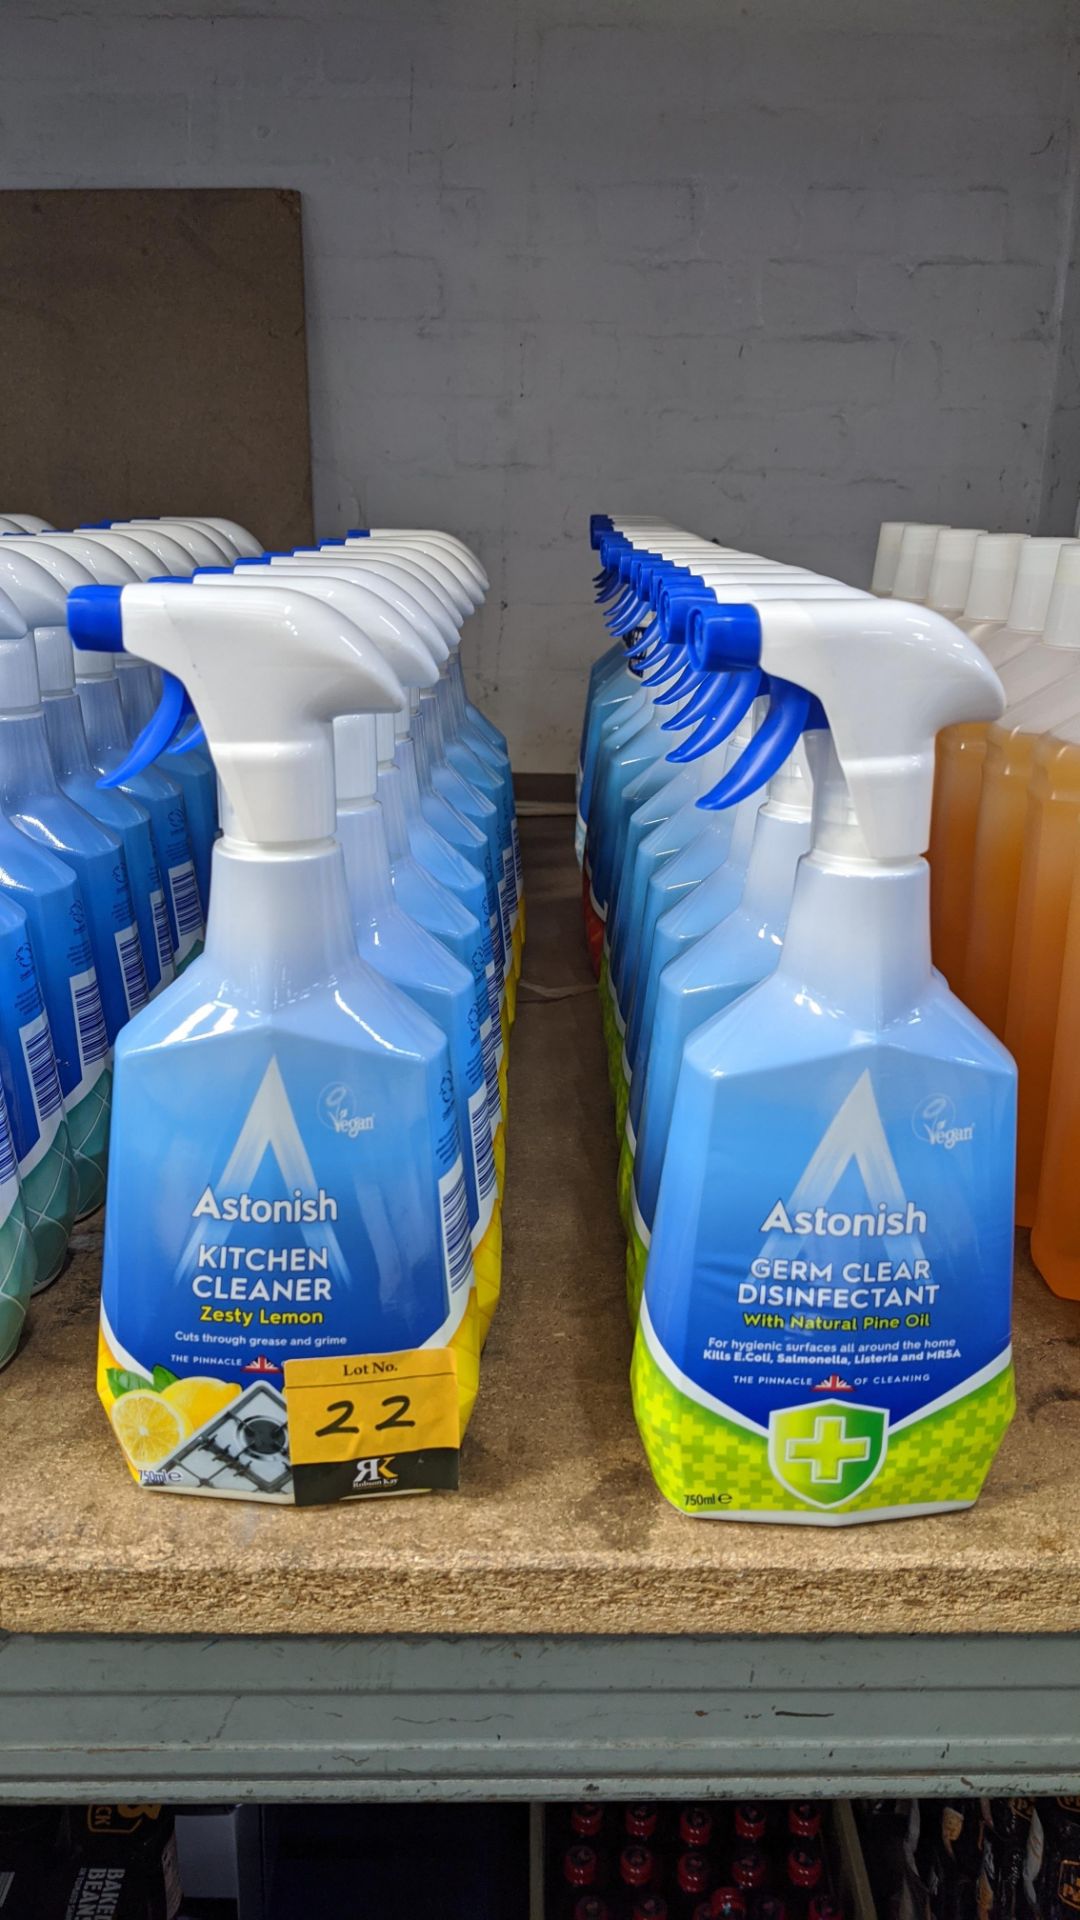 23 off 750ml bottles of Astonish kitchen cleaner & Germ Clear disinfectant. IMPORTANT – DO NOT BID